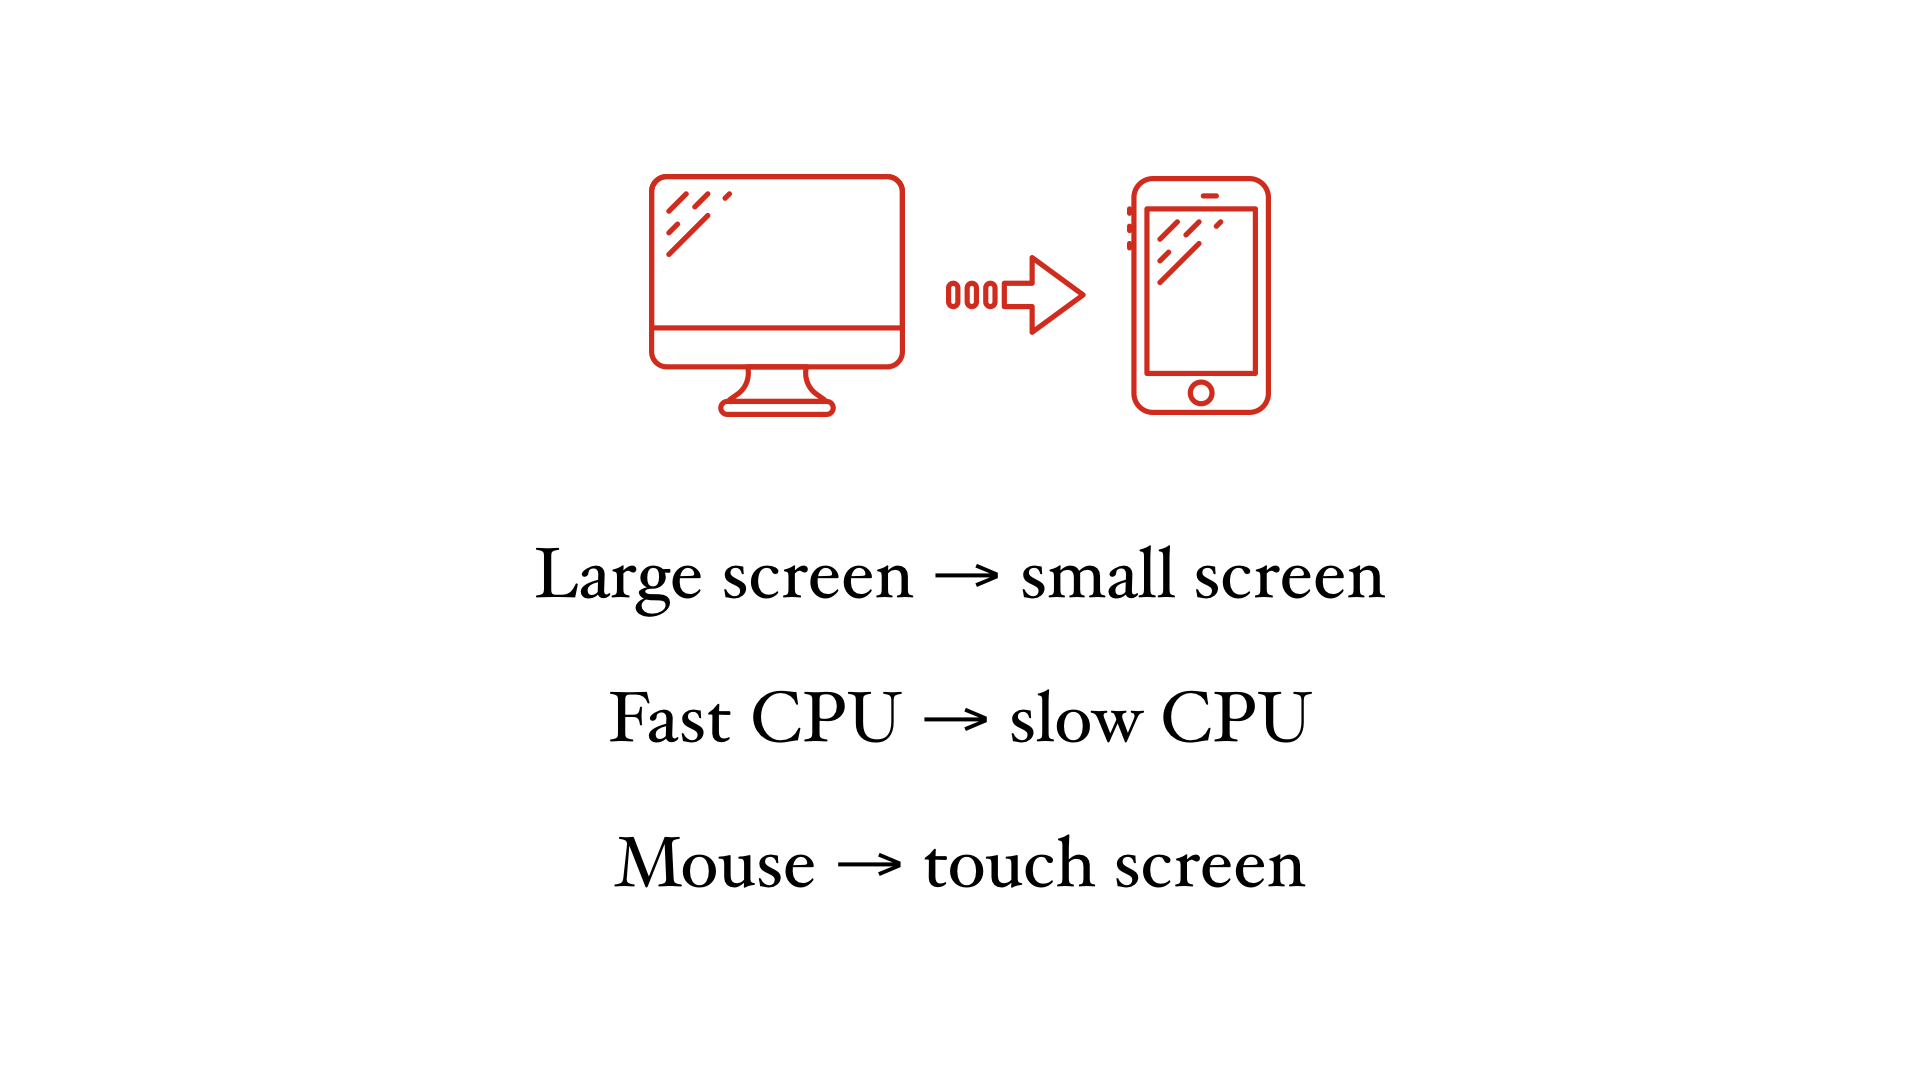 Illustration of desktop computer and mobile phone. Text belows says "Large screen → small screen", "Fast CPU → slow CPU", and "Mouse → touch screen".